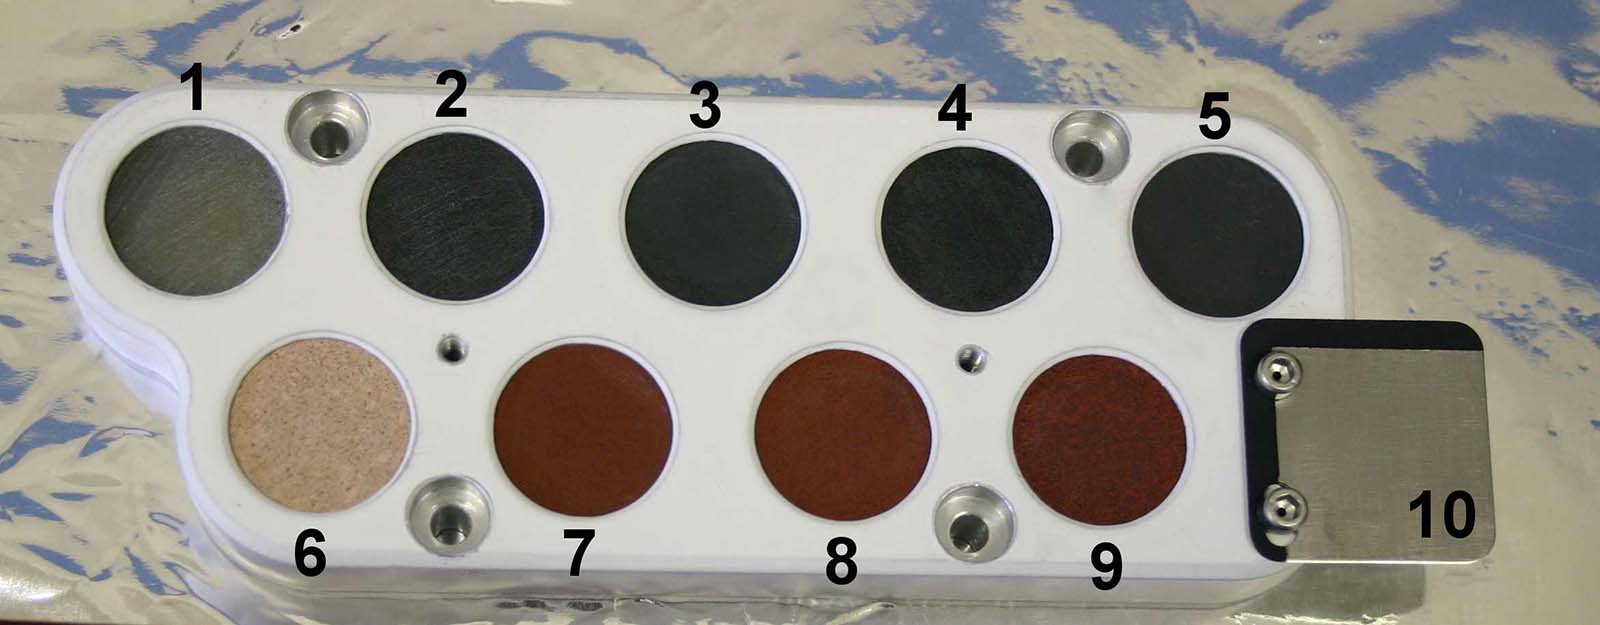 Small cyclindrical samples varying in color from shades of green on the top row to shades of red on the bottom row are shown in an up close image of the Curiosity rover's calibration target.